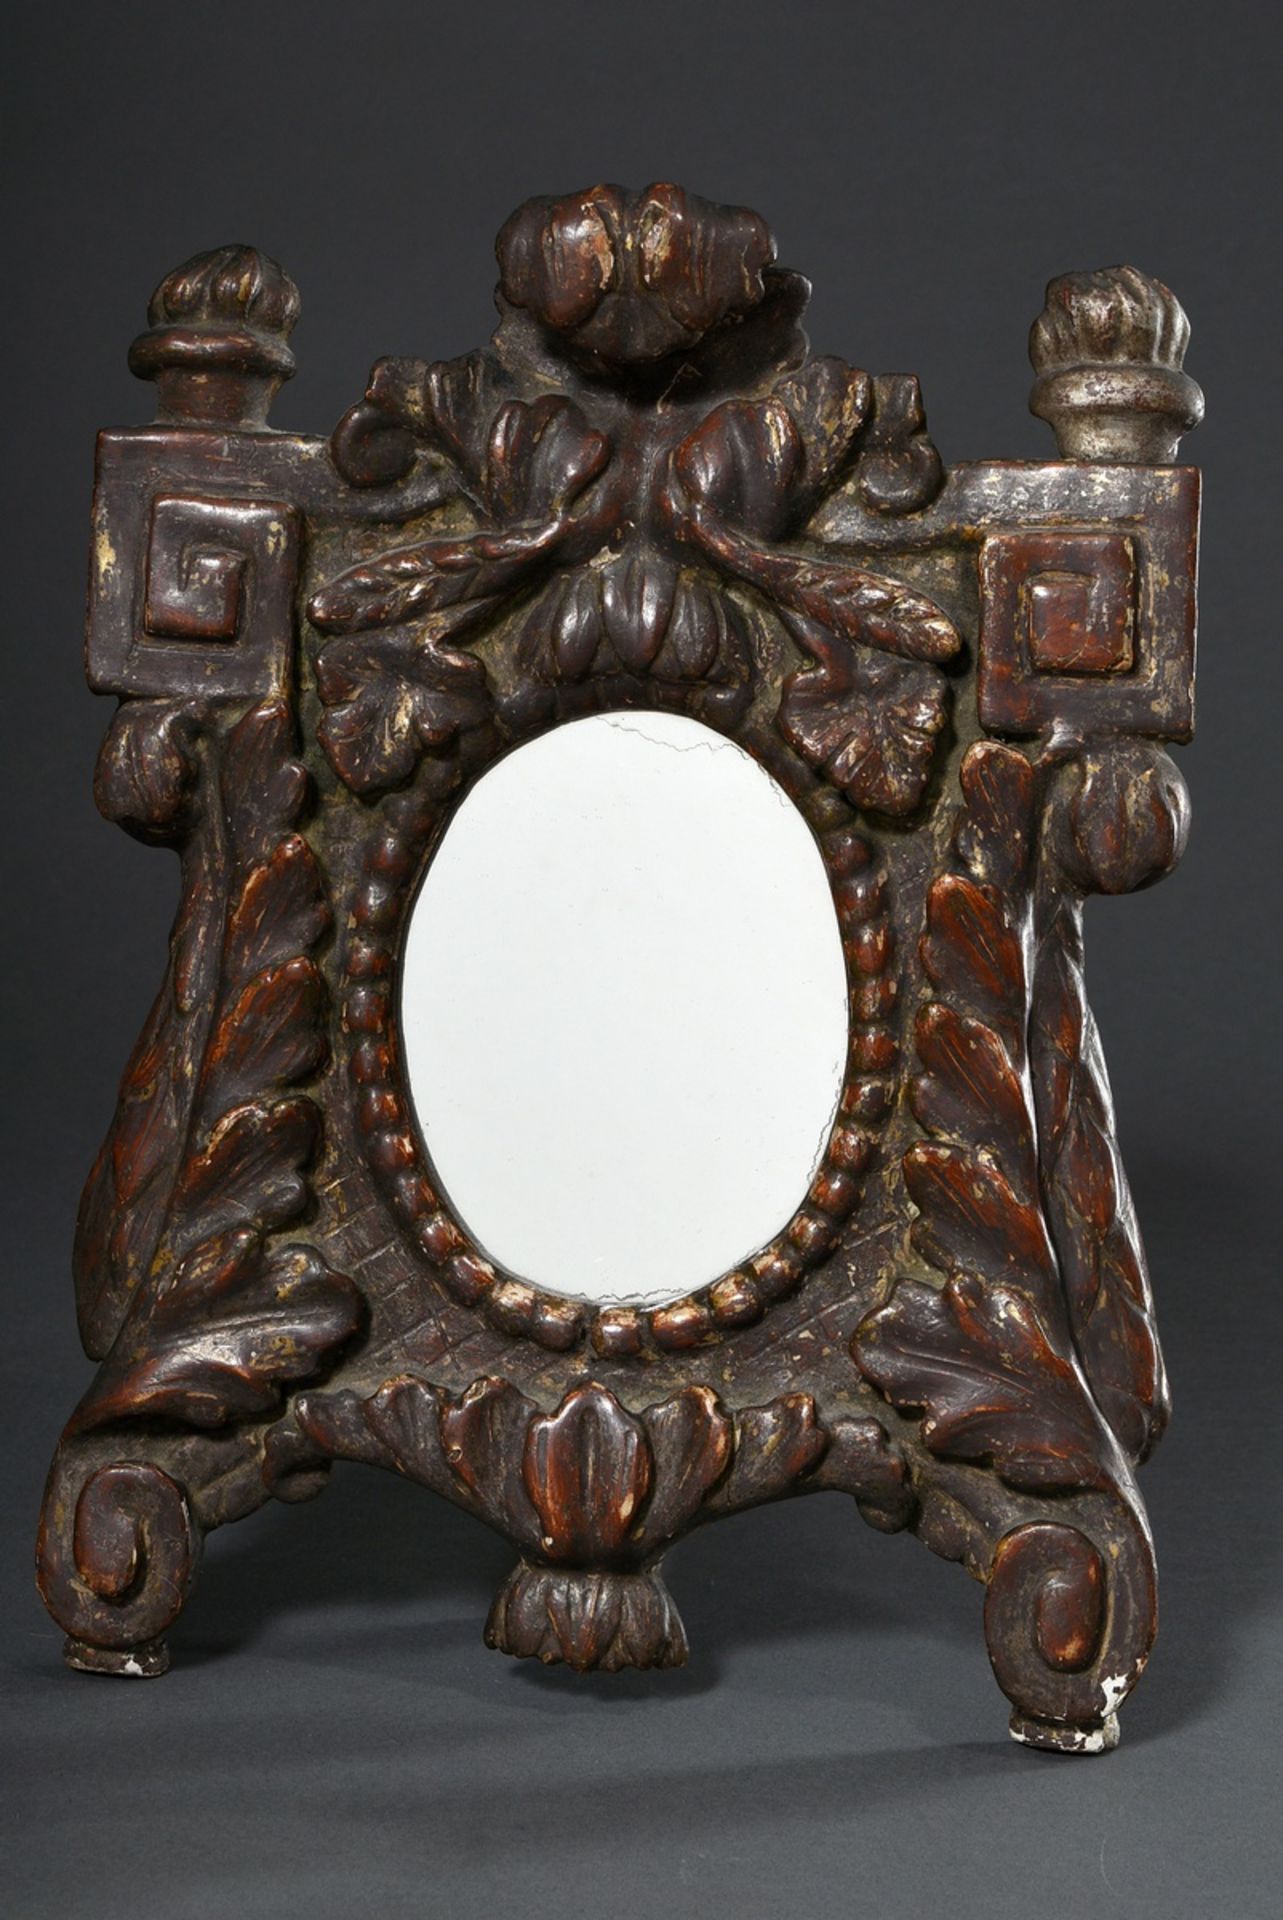 Small coloured classicist altar mirror, with remains of gold and silver mountings, leaf and ornamen